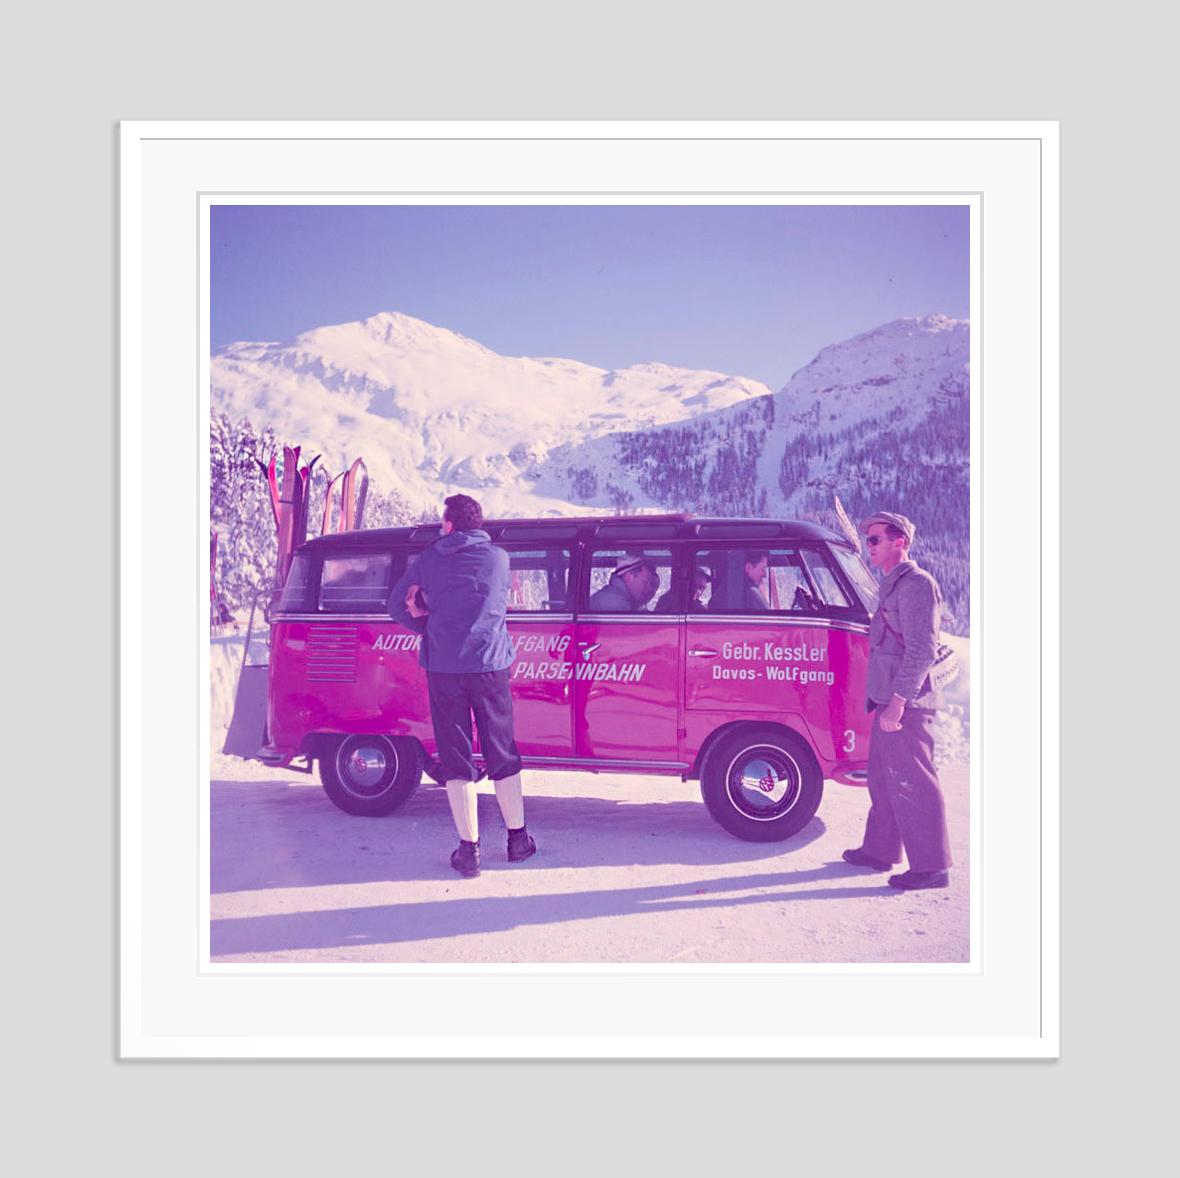  Ski Bus 1951 Oversize Limited Signature Stamped Edition  - Photograph by Toni Frissell